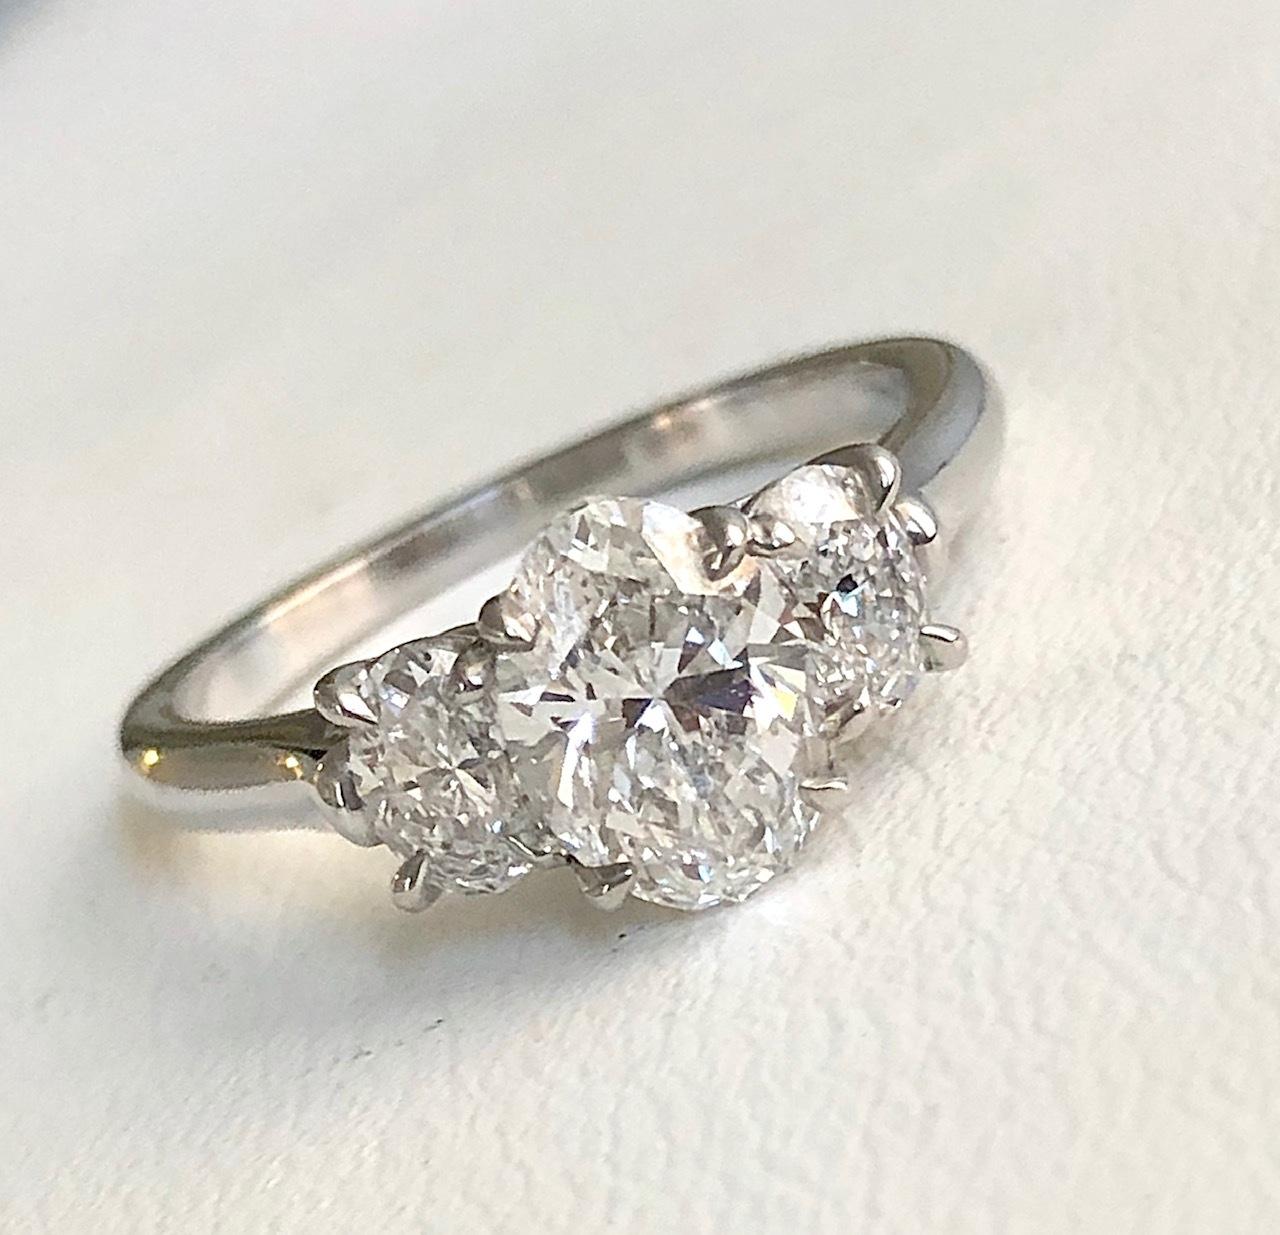 Our signature 3-stone Oval Diamond ring, handmade in Platinum, set with a center Oval diamond 1.20 carats,with a GIA report DVS2, and a pair of matching side Oval diamonds 0.58 carats.

We design and manufacture all our jewelry in our workshop,